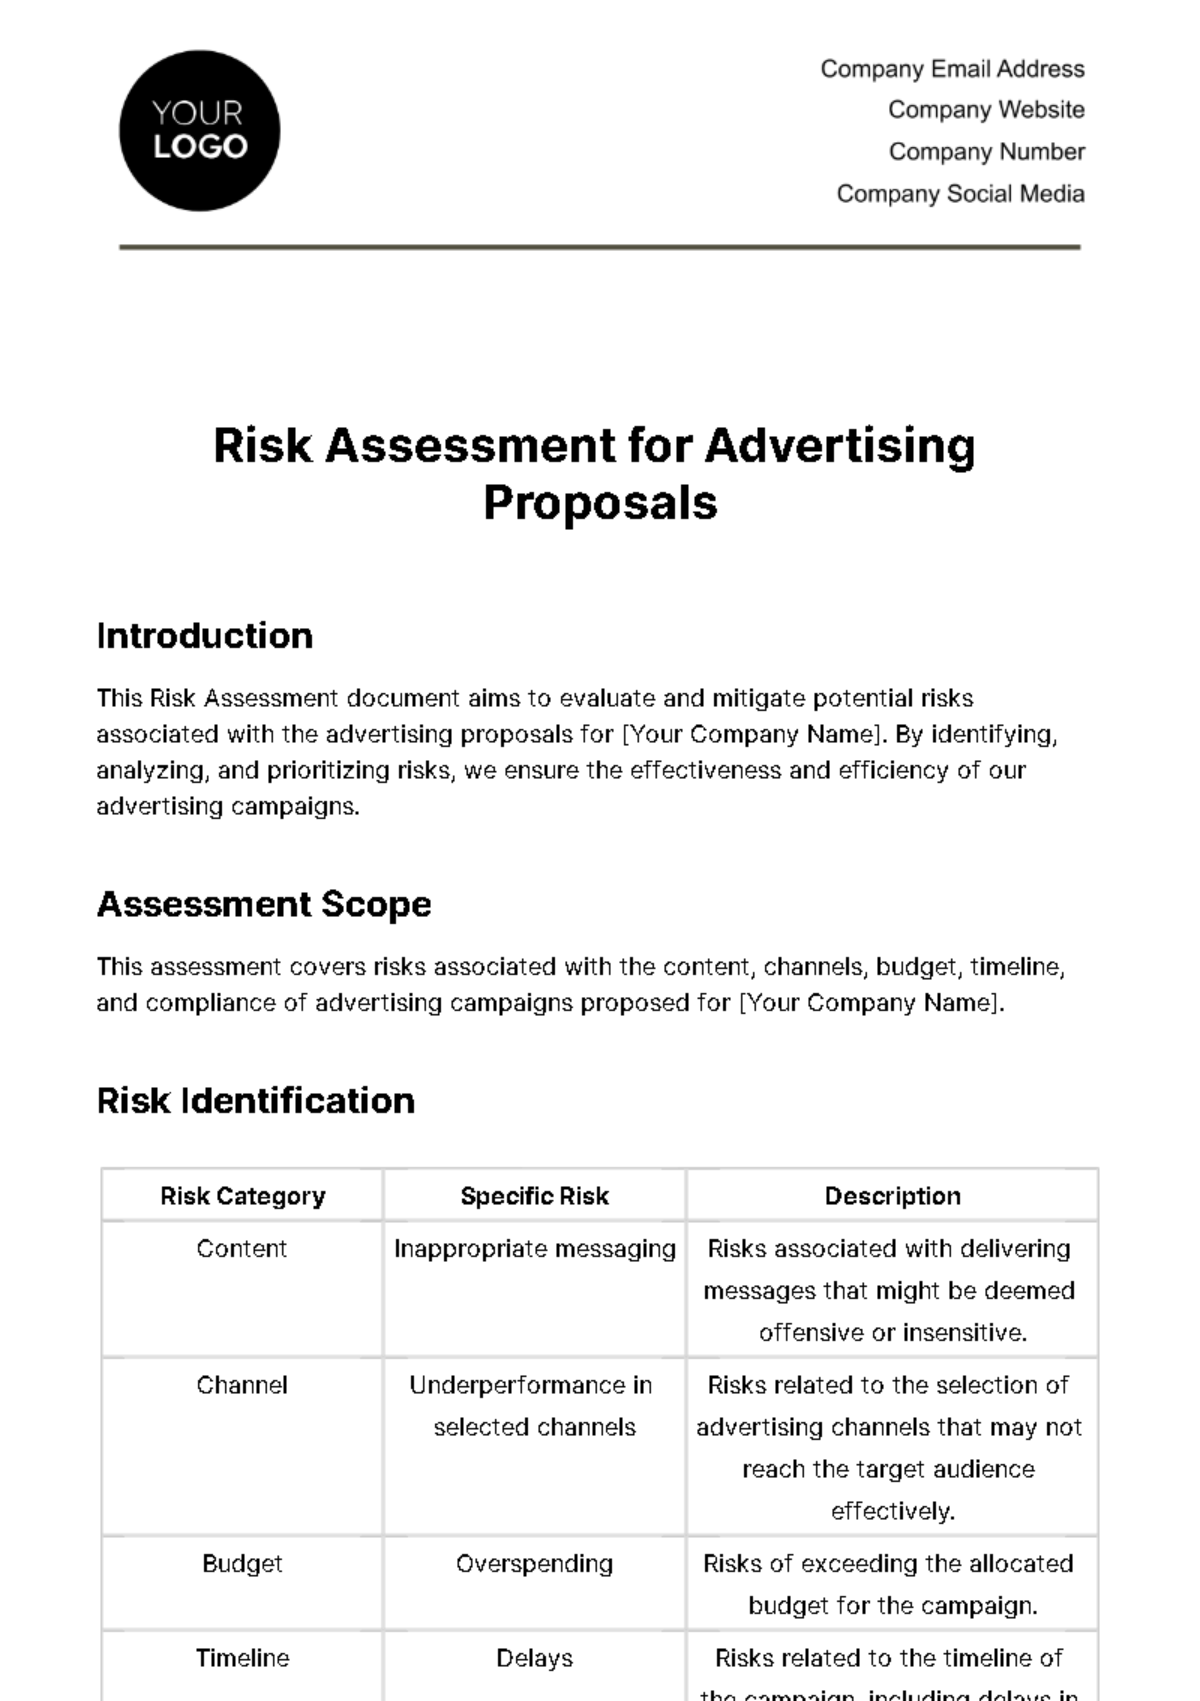 Free Risk Assessment for Advertising Proposals Template